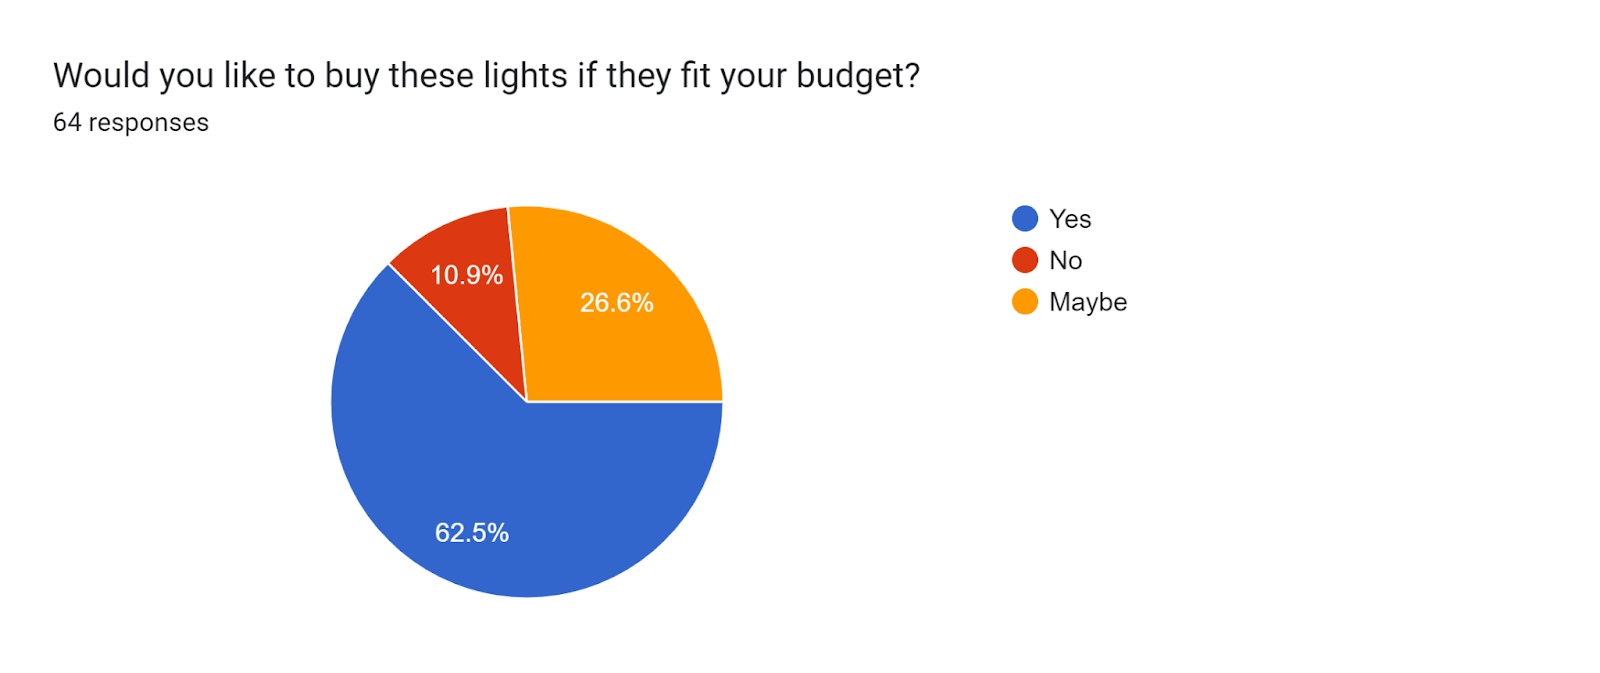 Forms response chart. Question title: Would you like to buy these lights if they fit your budget?. Number of responses: 64 responses.